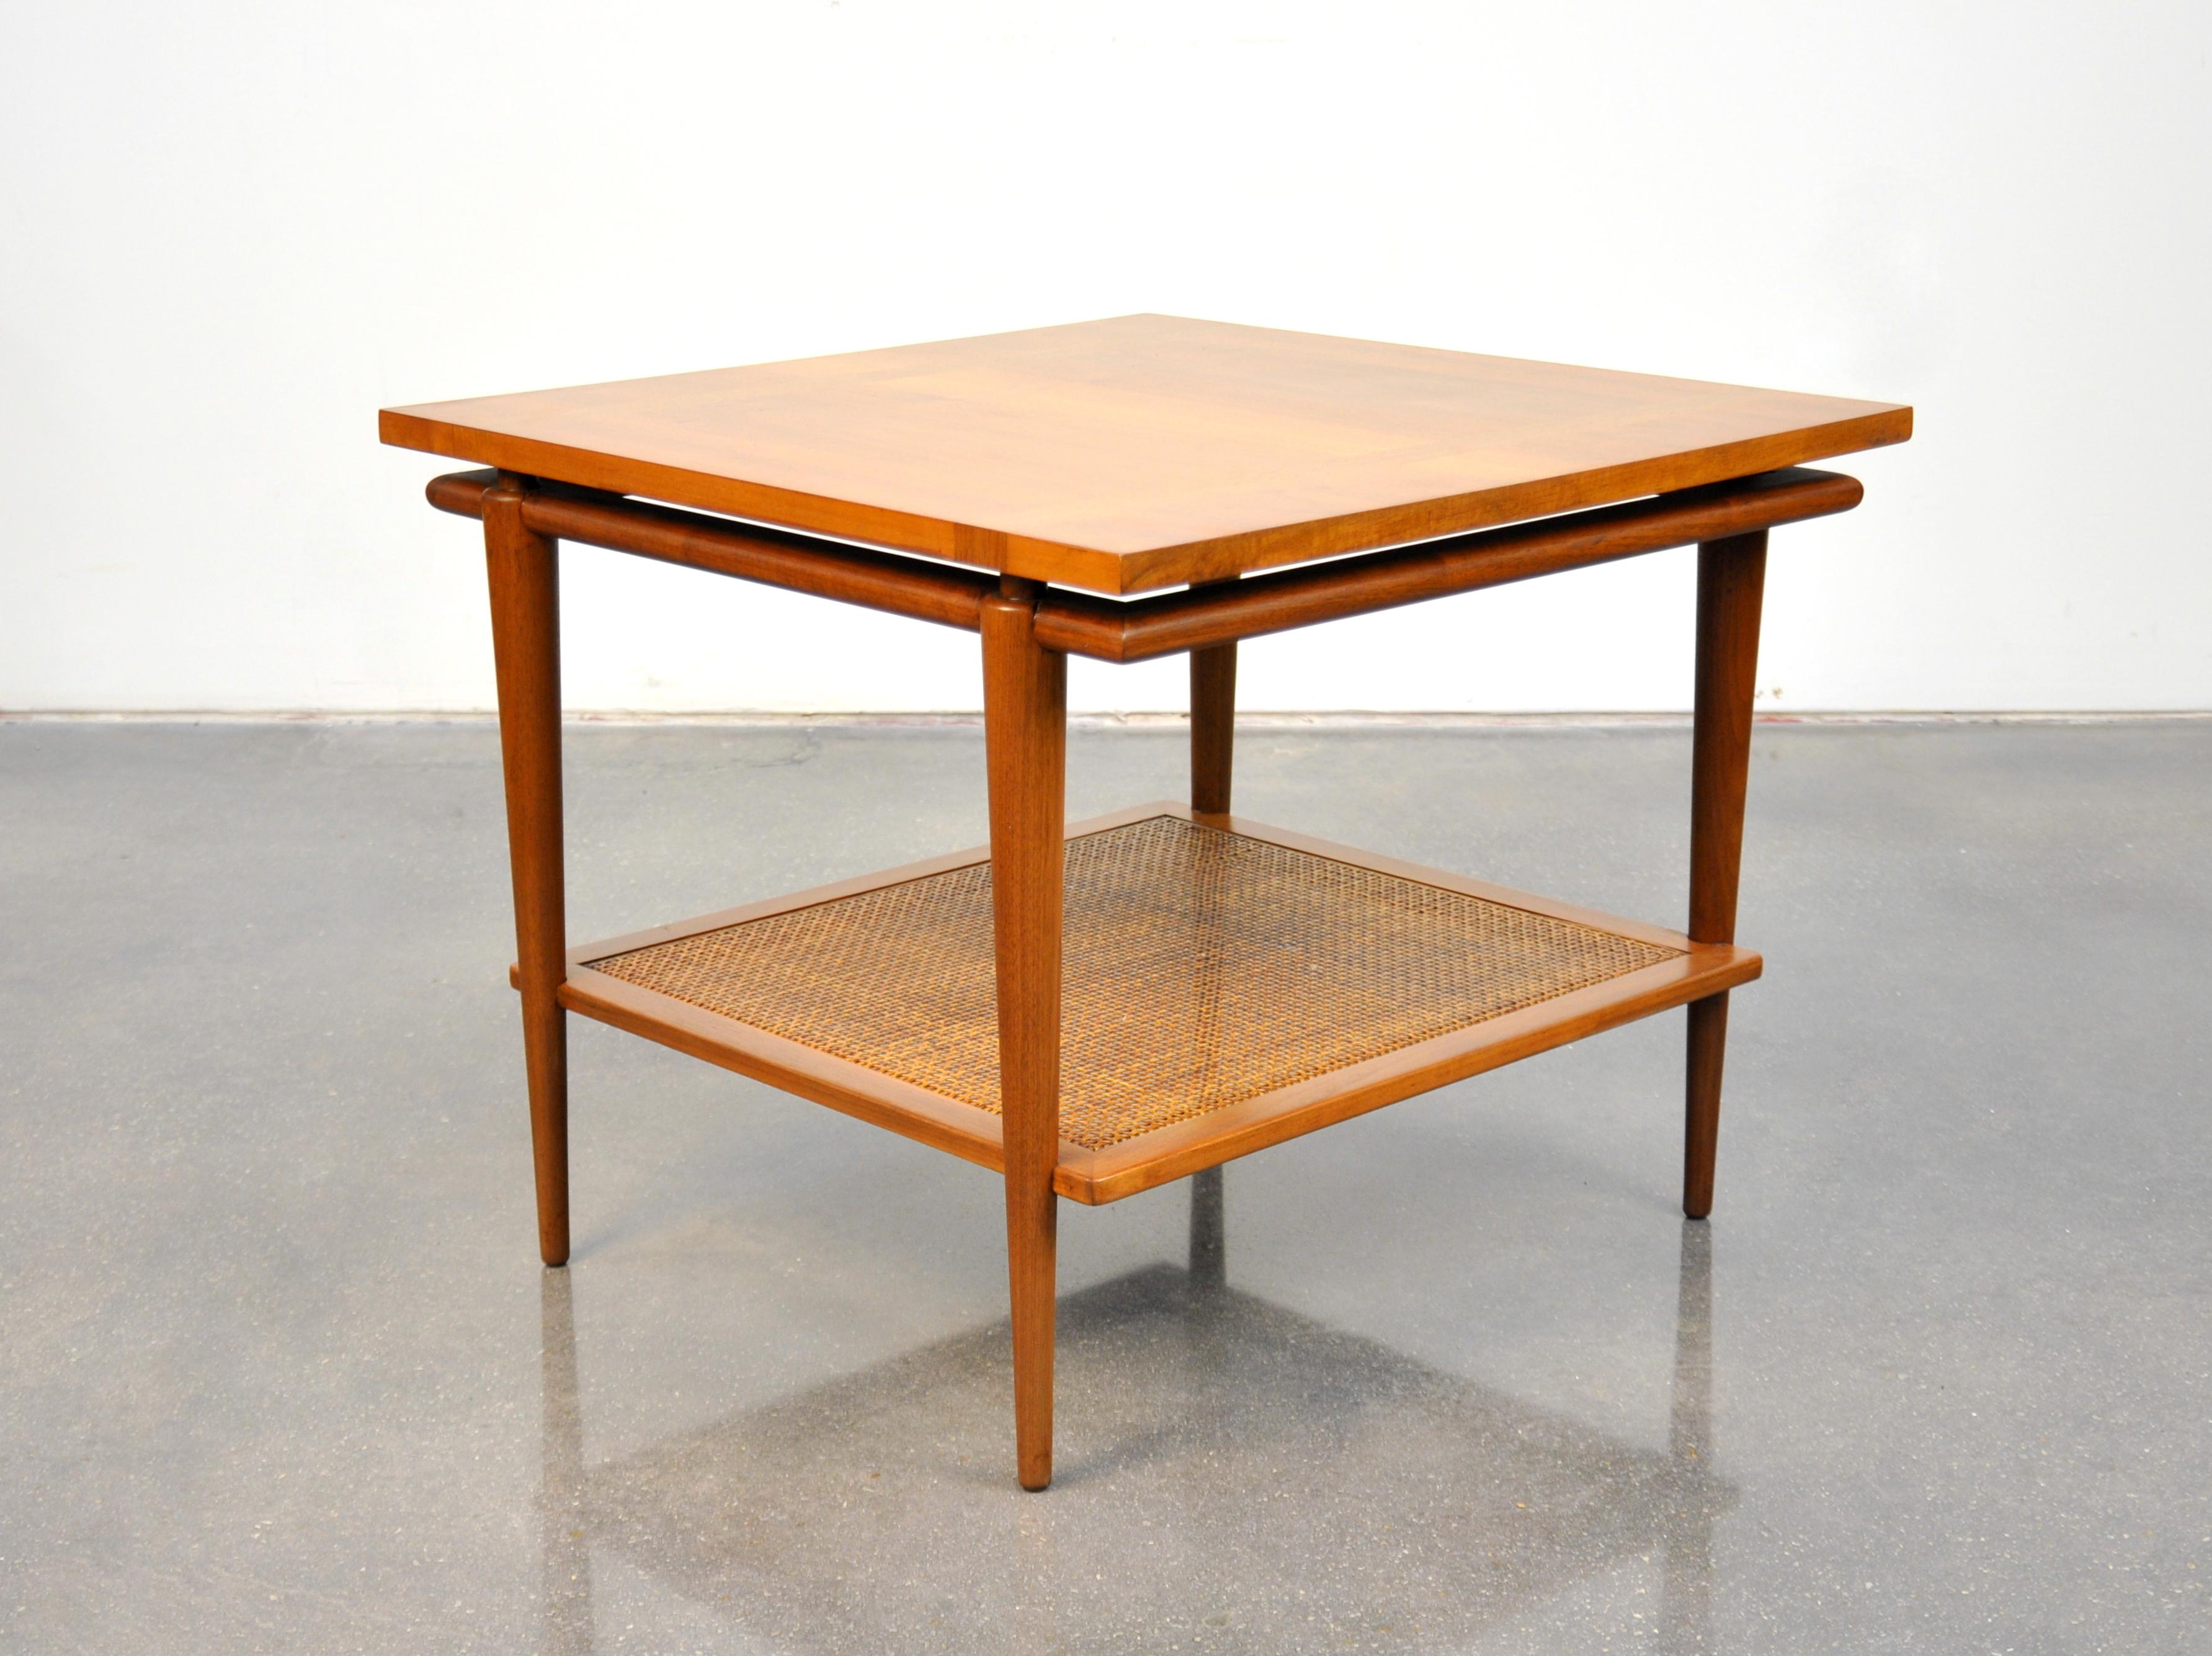 A vintage 1960s Mid-Century Modern end table with floating top and caning by John Widdicomb. The professionally refinished occasional table features a square top floating over a base with tapering legs and a caned magazine shelf. Works well with